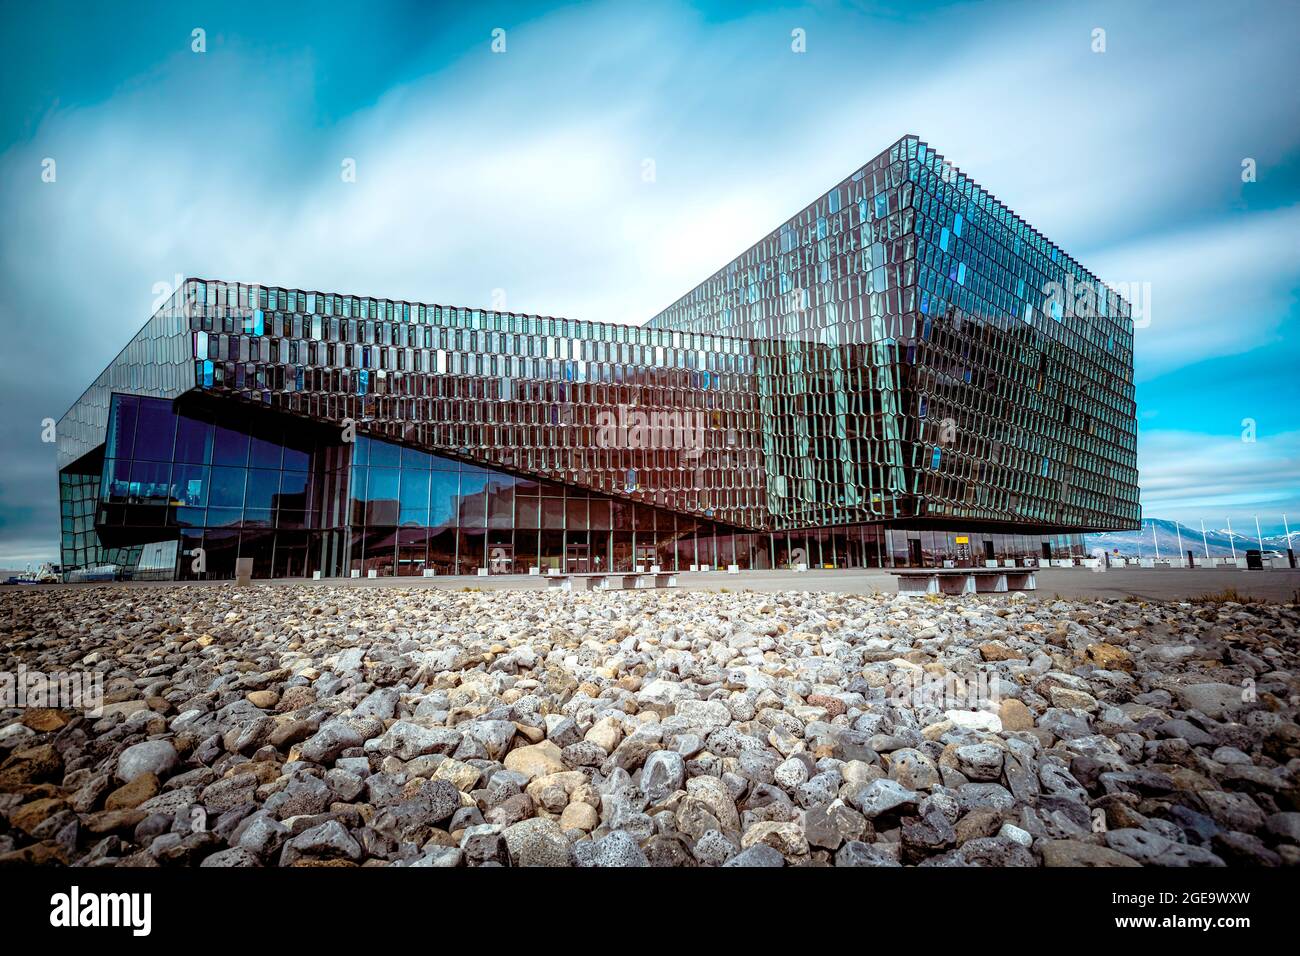 The award winning architecture of the concert hall Harpa. Stock Photo